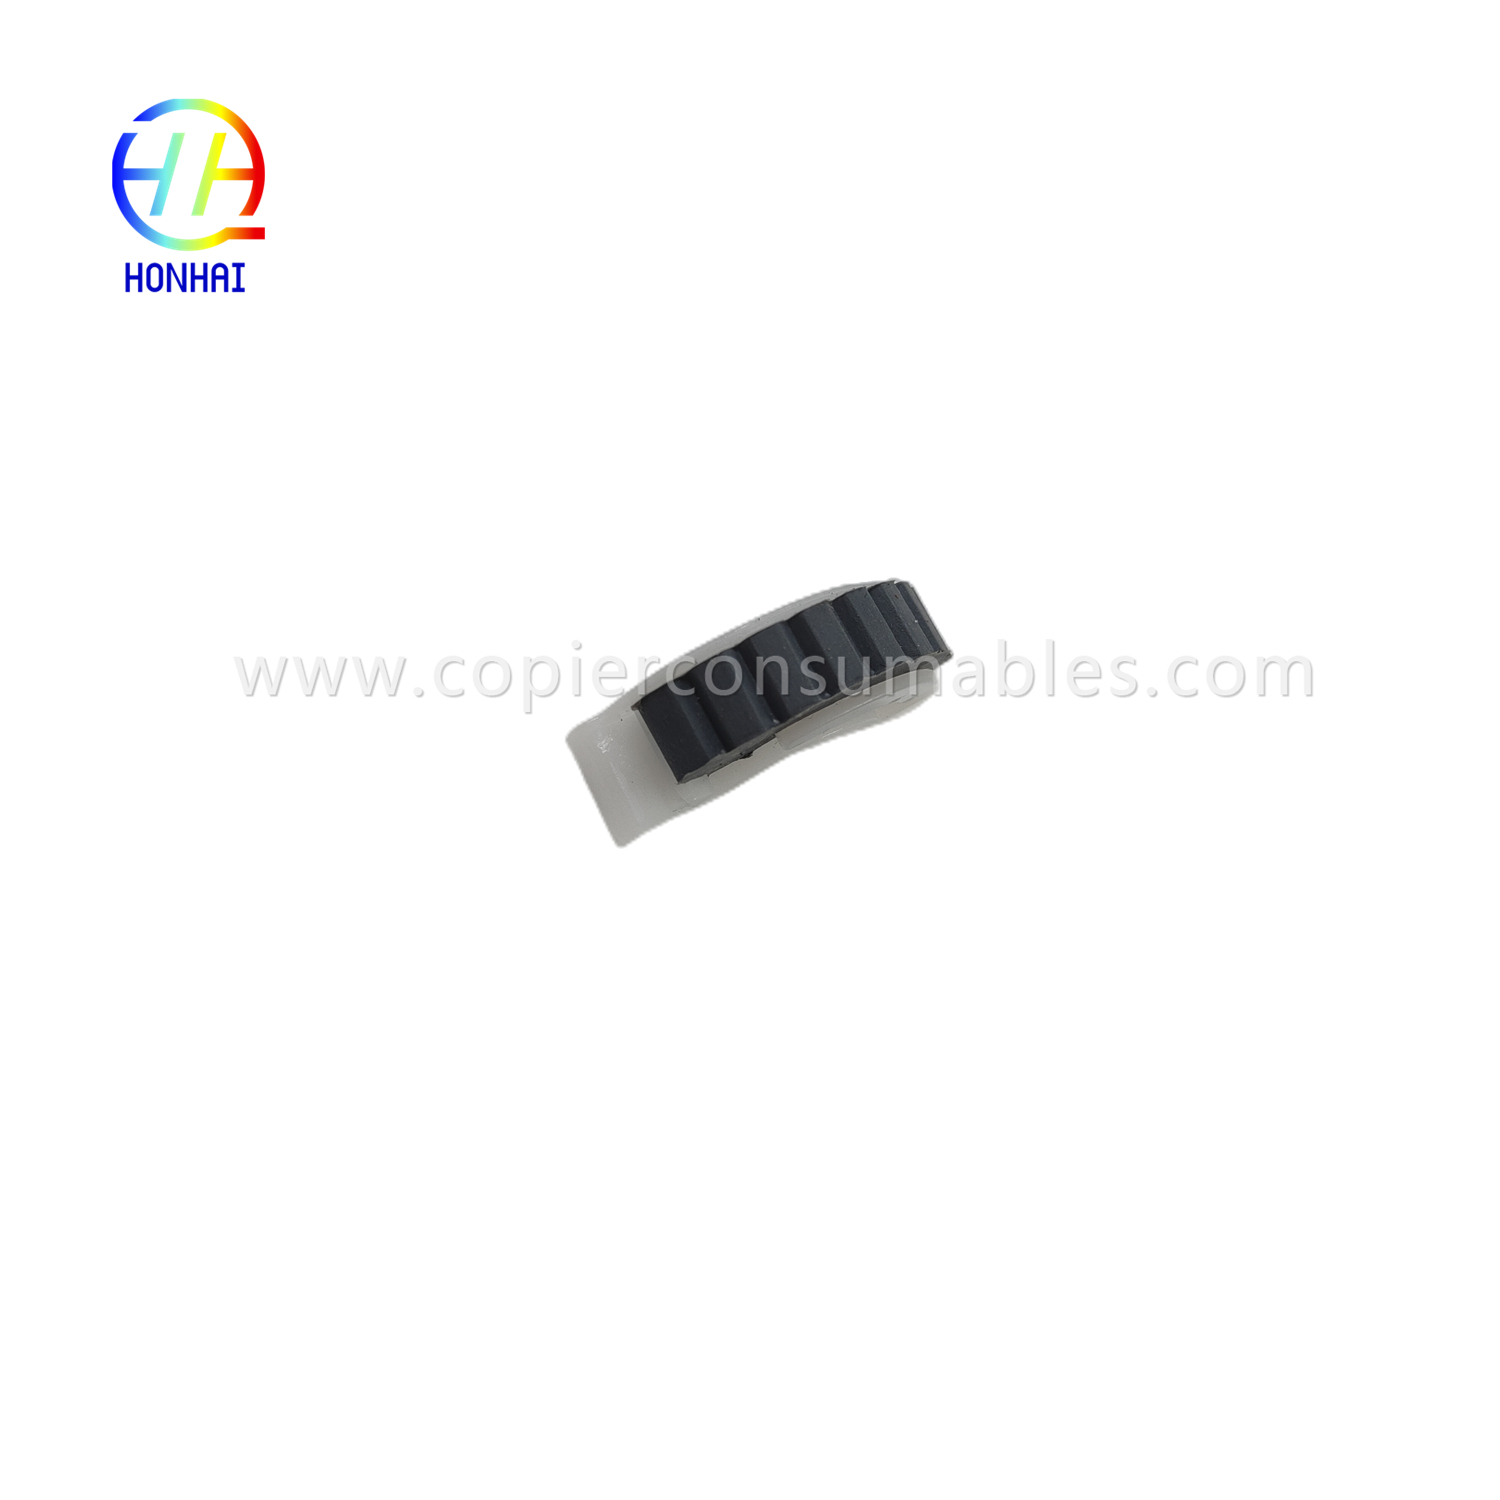 Paper Feed Separaion Pickup Roller for Canon FB4-9817-030 FB4-9817-000 FF6-1621-000  iR 2016 2018 2020 2320 1600 2318 2420 2600 (5)